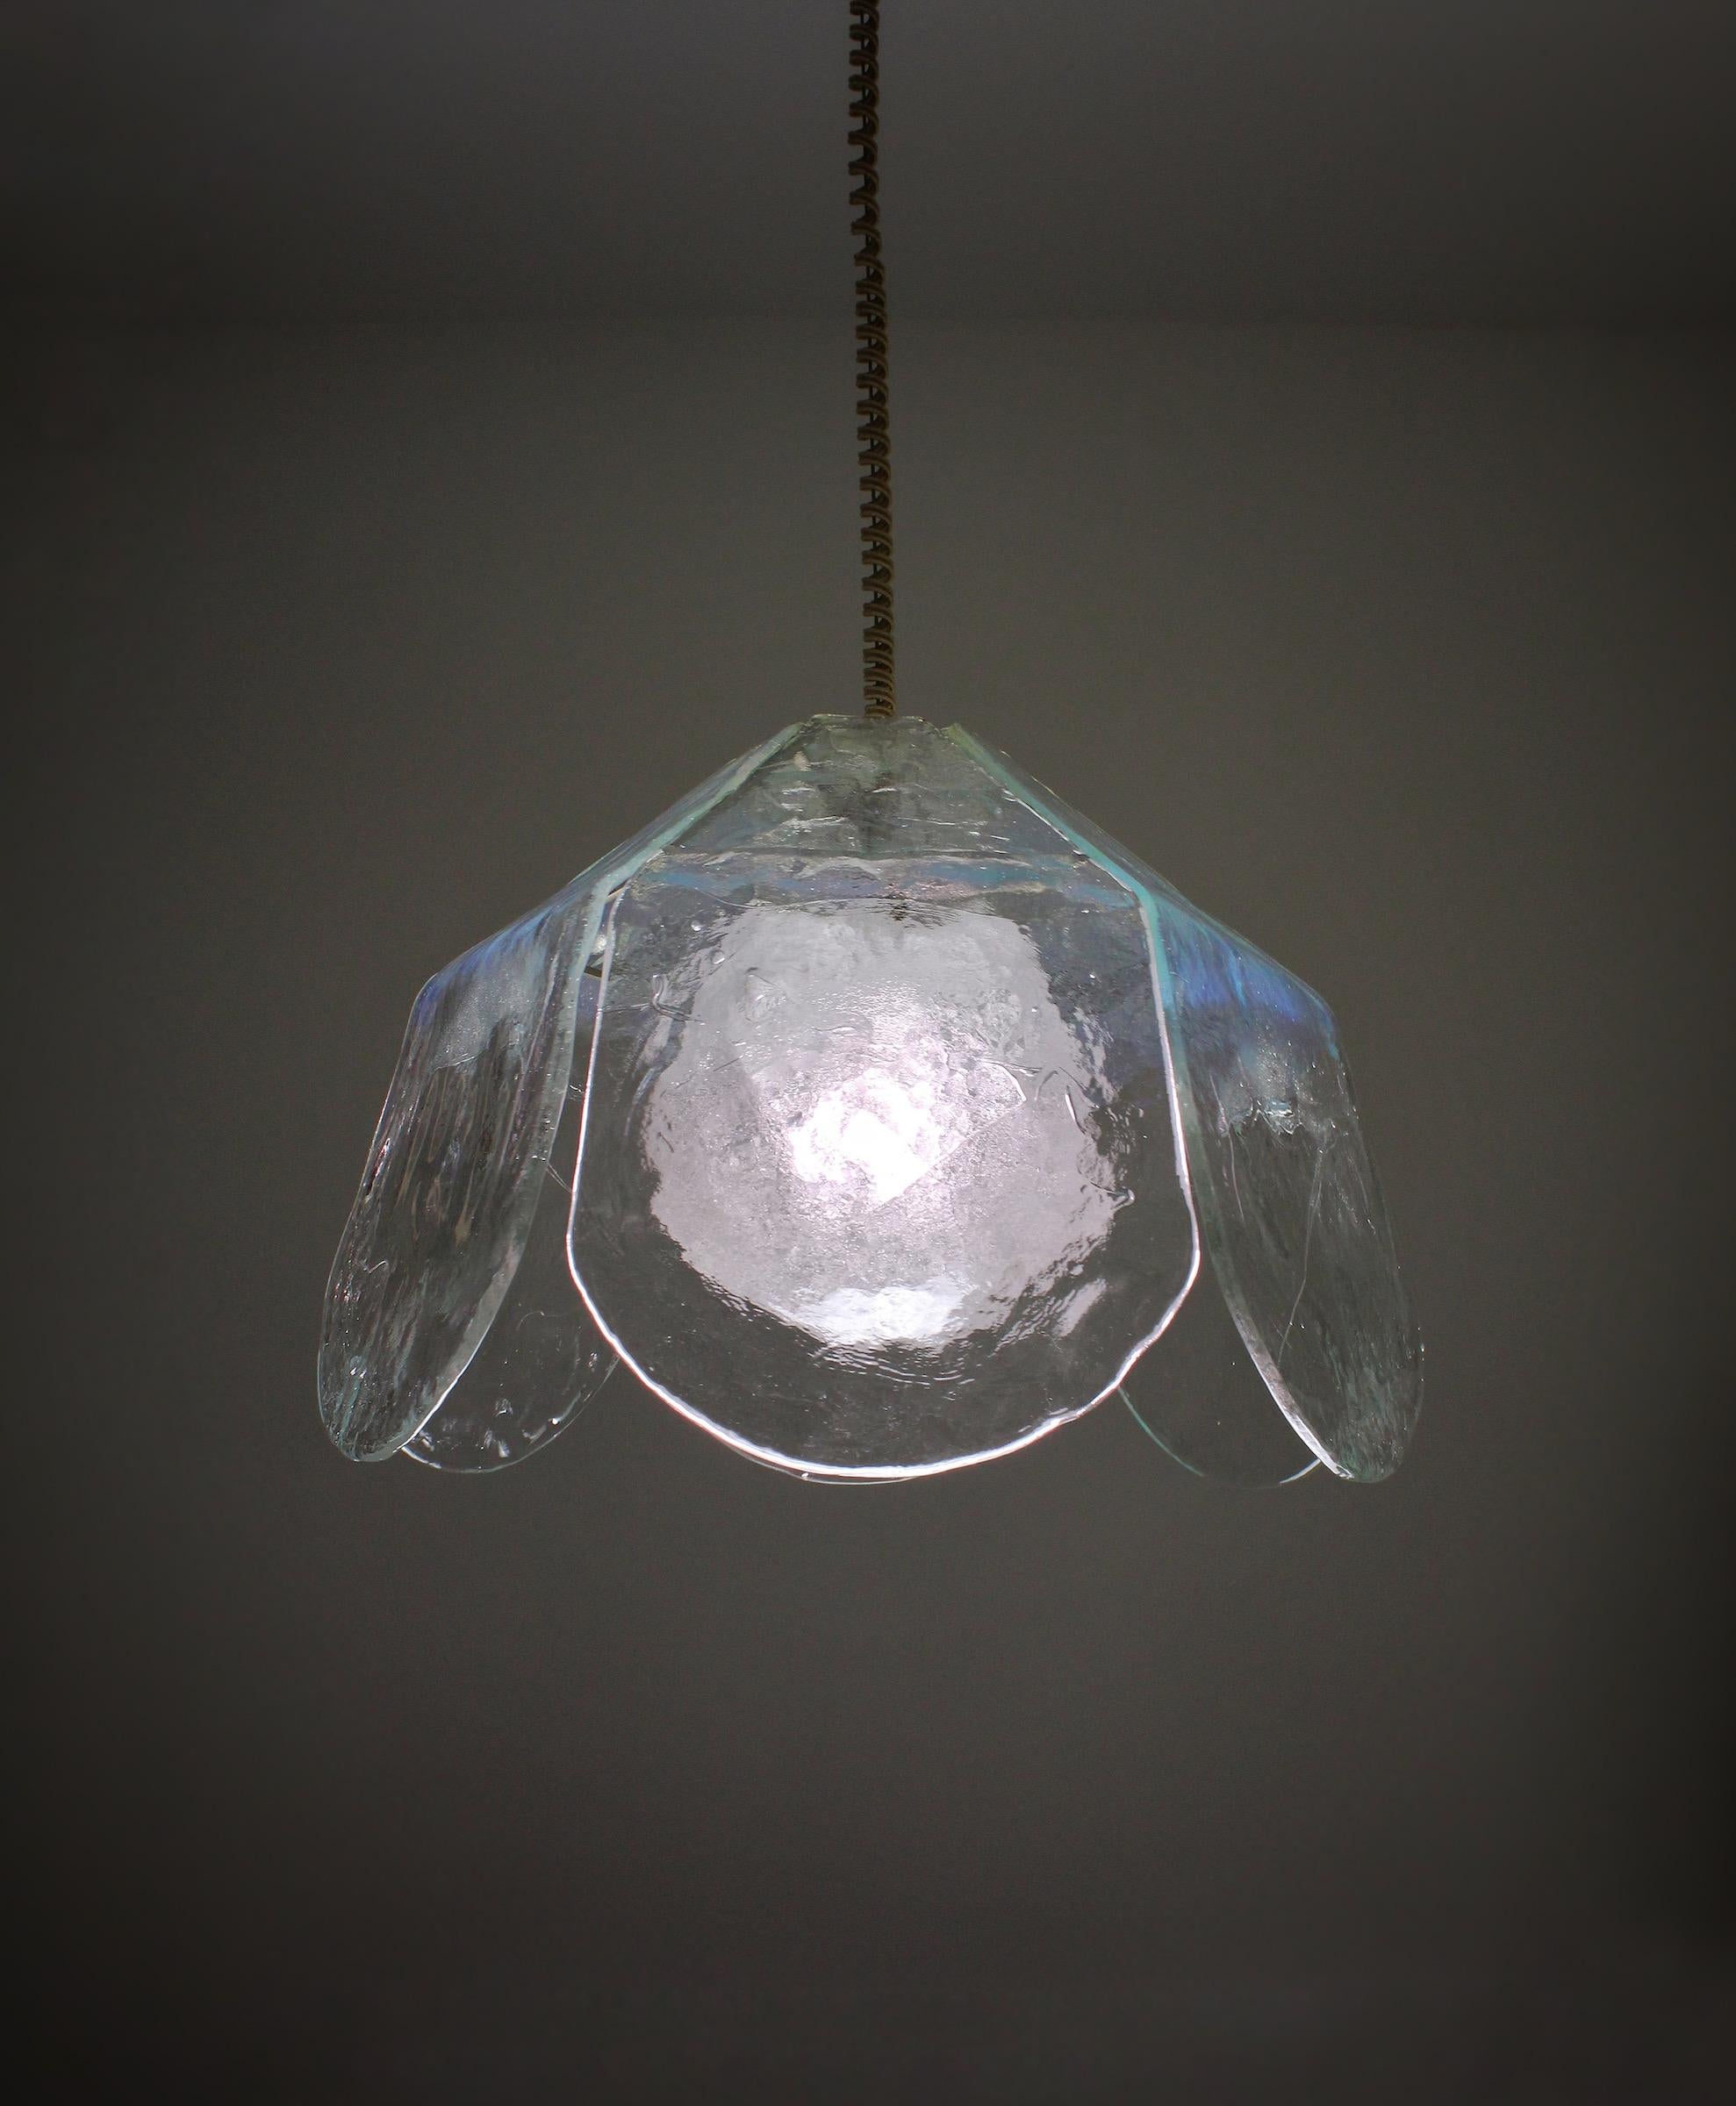 Large glass pendant lamp, designed by Carlo Nason for Mazzega during the 1970s. This exceptional lamp is made of 6 rough glass plates and a “peleguso” glass globe in the center. Together they form a flower like shape. A warm and magical light is